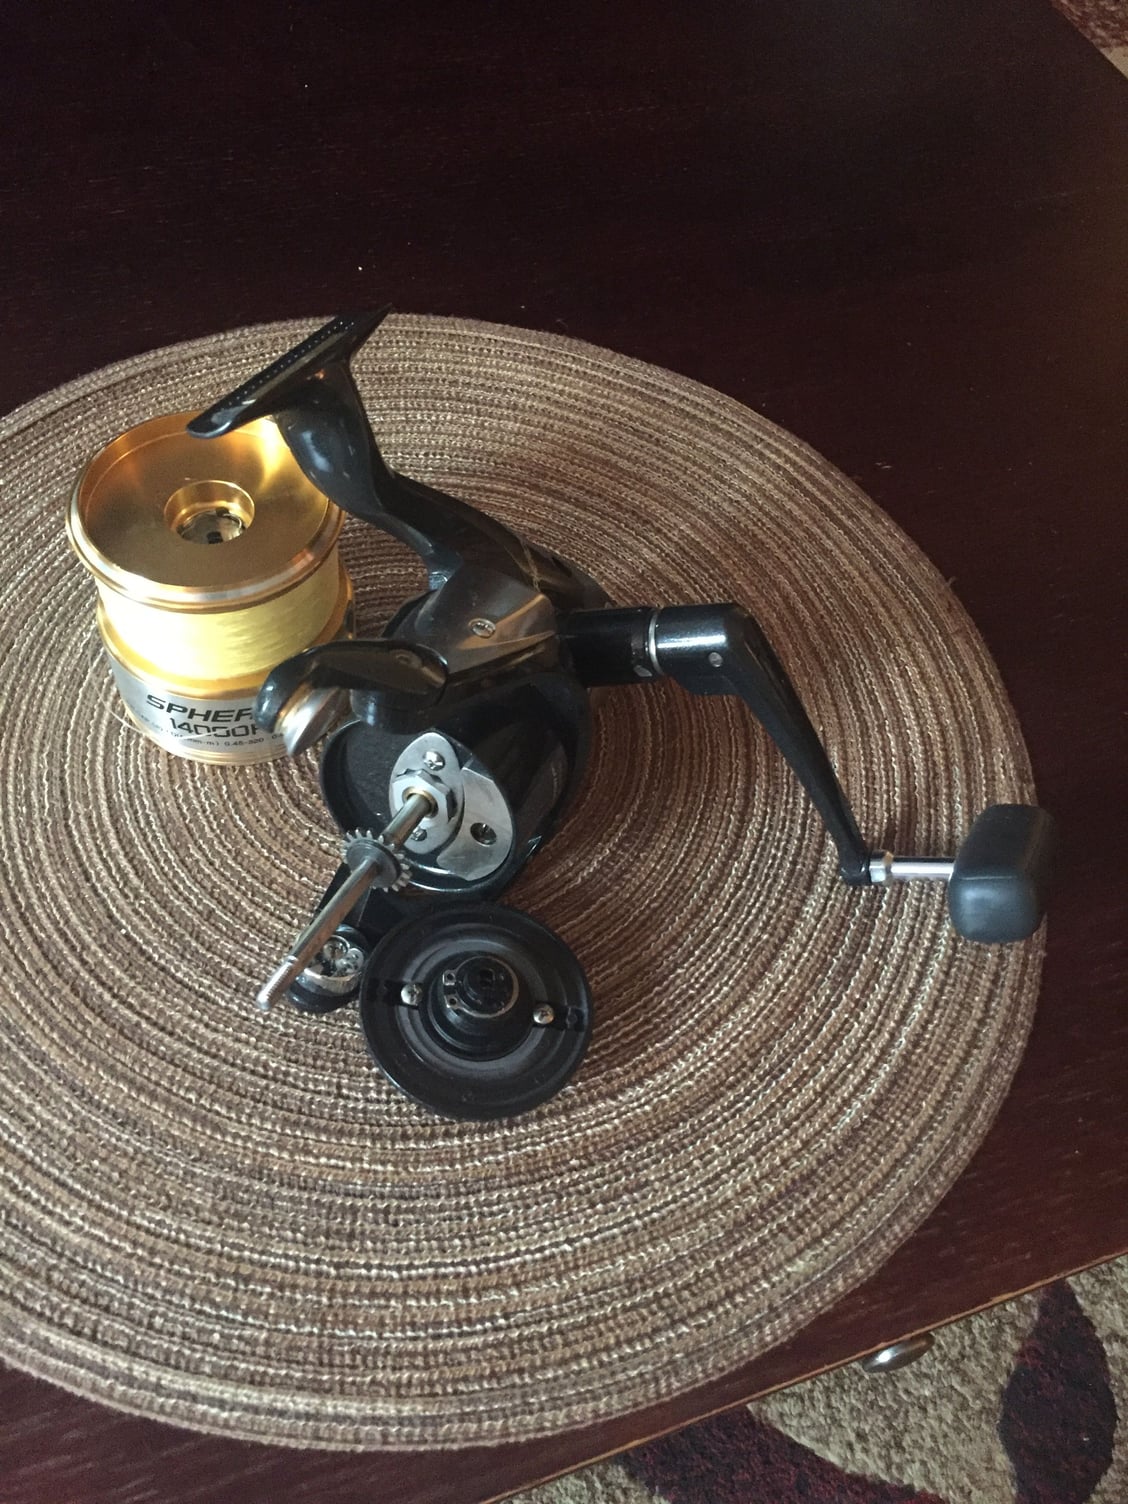 Shimano Spheros 8000FB ((( Sold ))) - The Hull Truth - Boating and Fishing  Forum